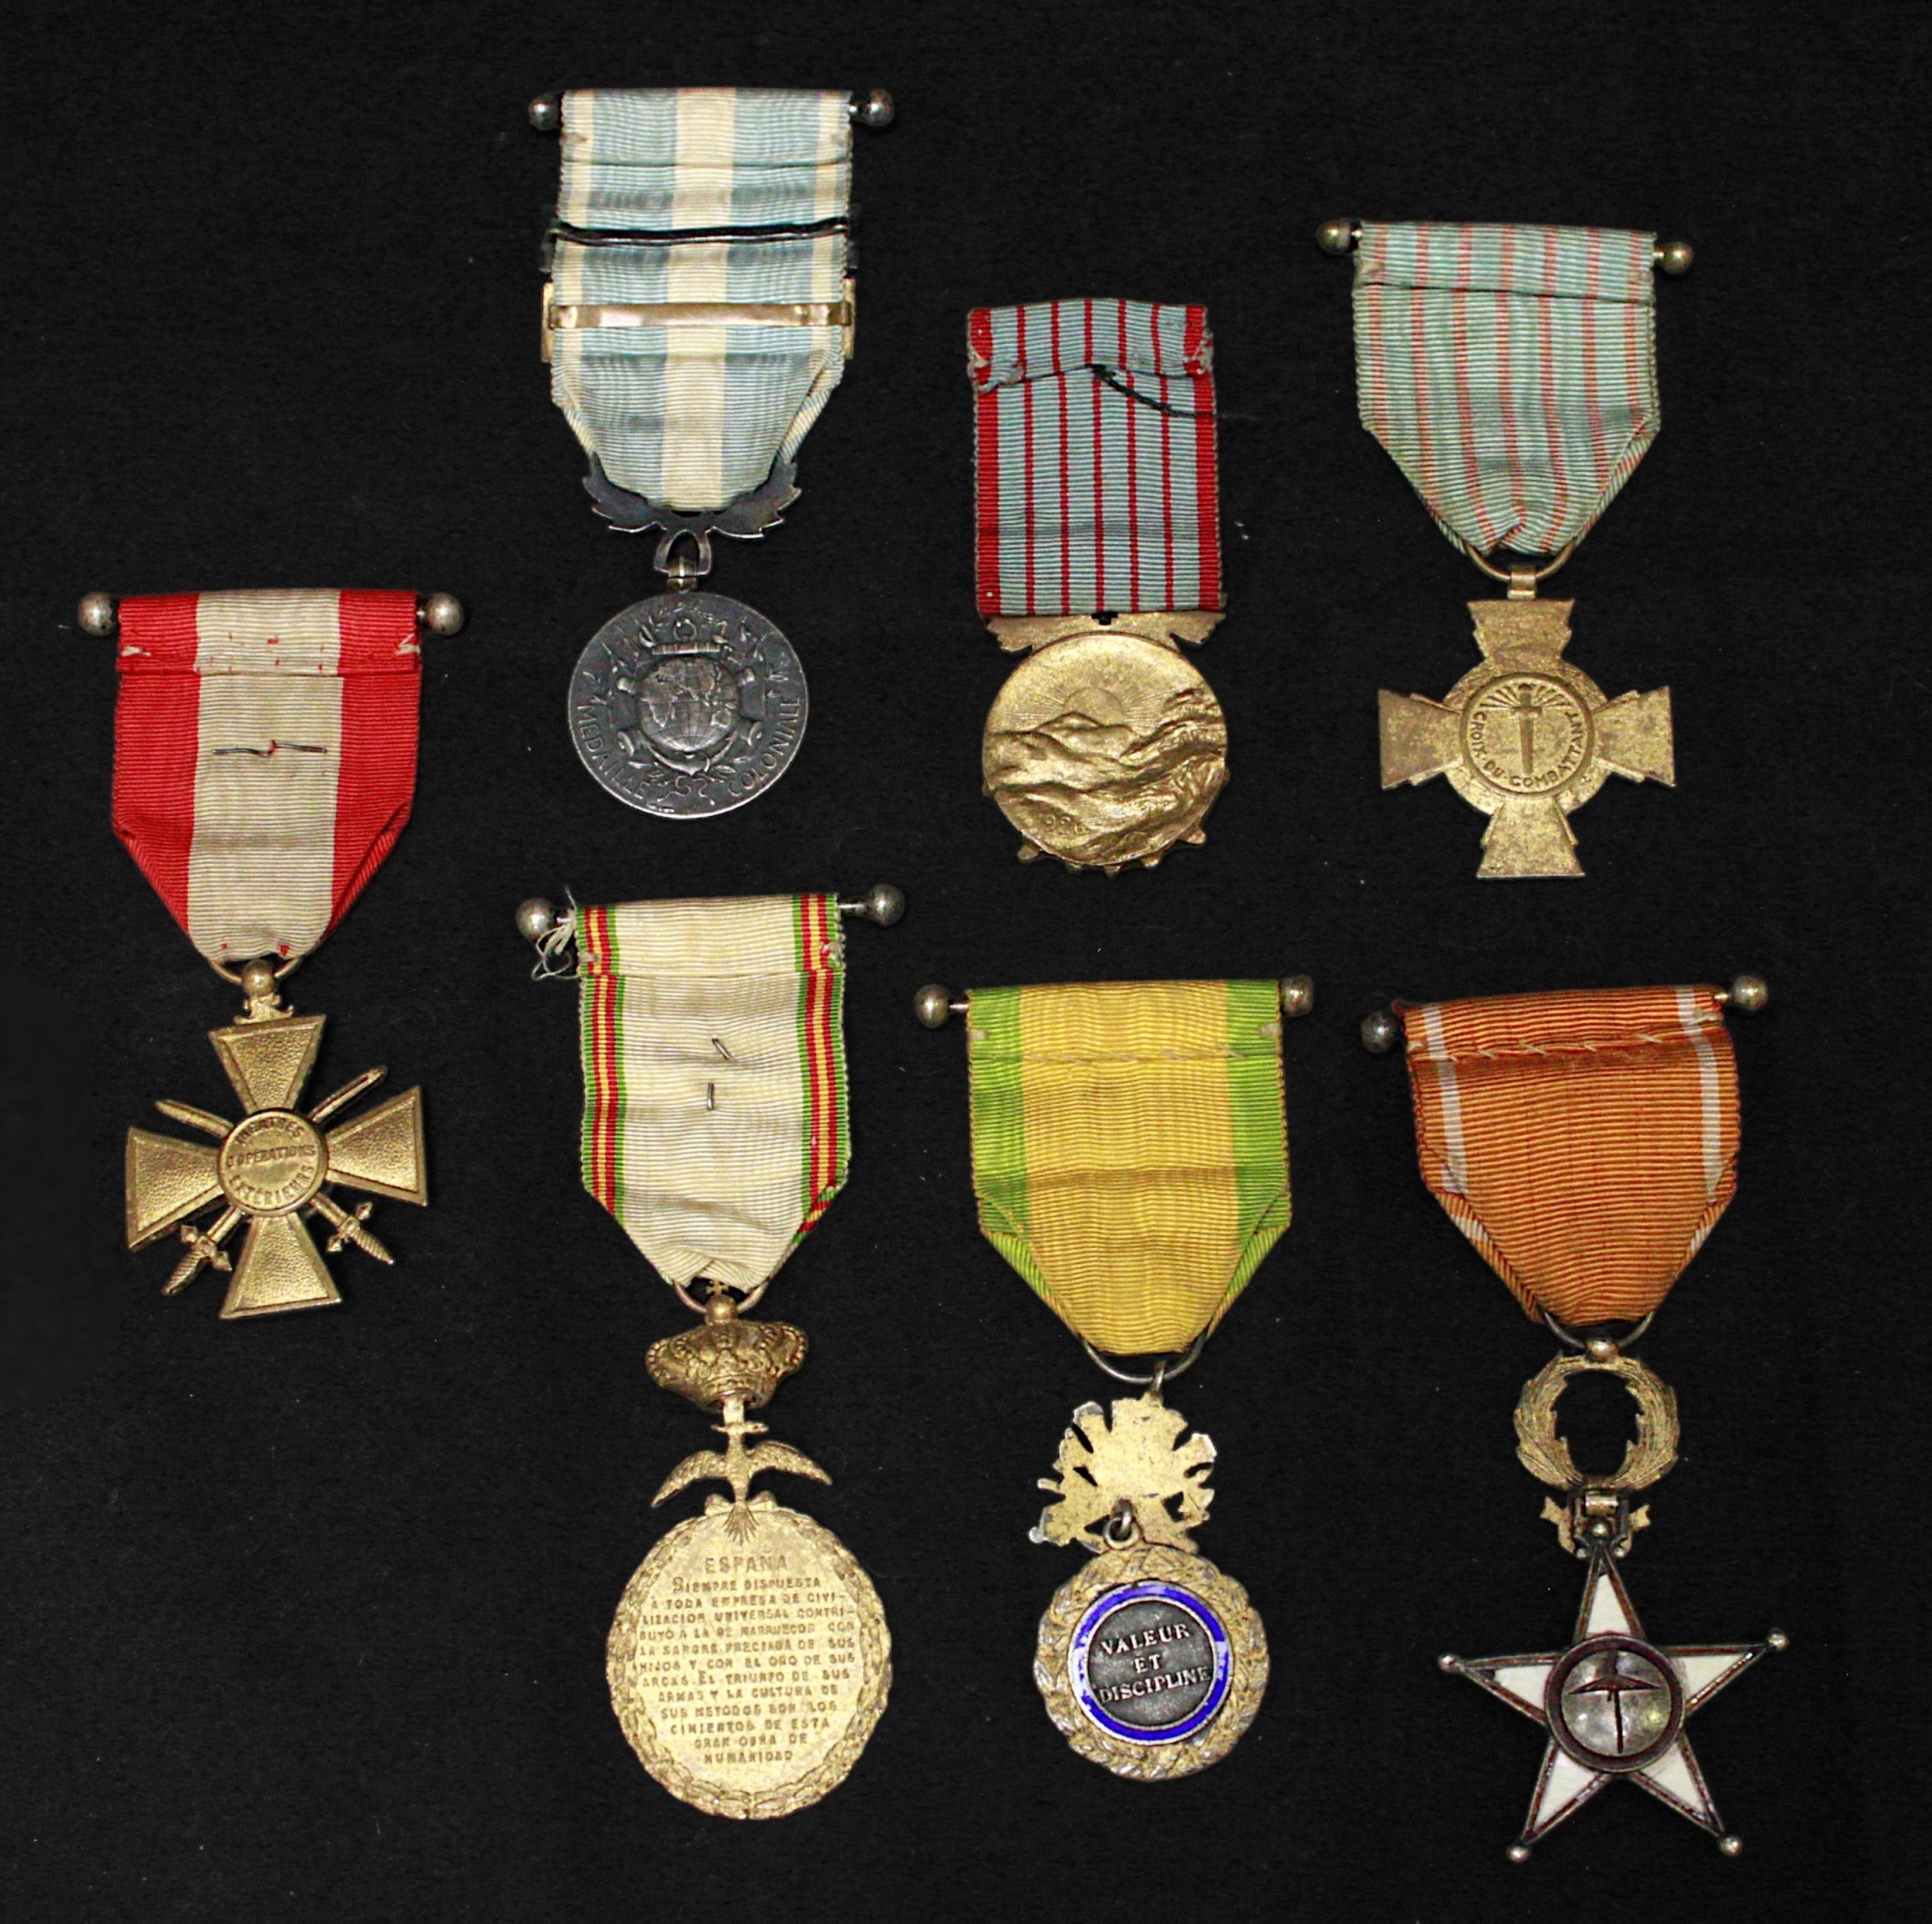 Seven French/Eurpoean Medals for North African/Middle East, including Moroccan order of Ouissam - Image 2 of 2